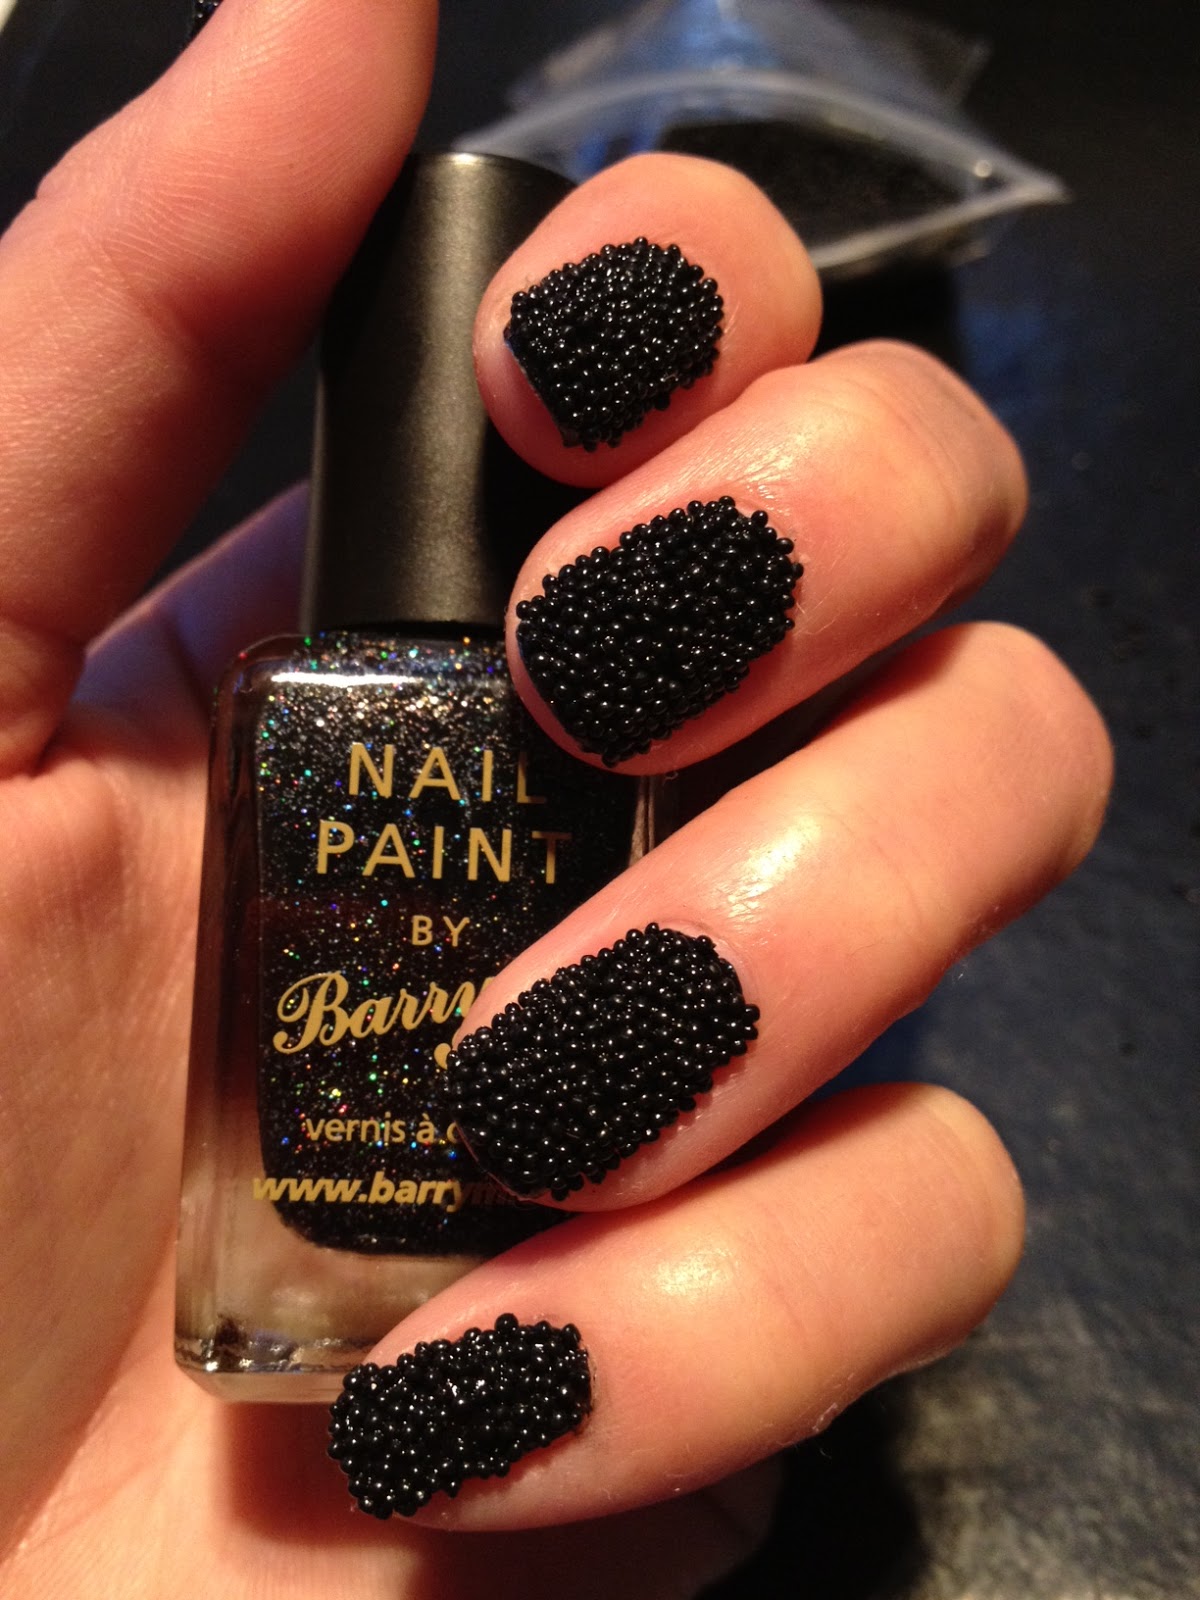 I have finally got round to posting this 'How To' for Caviar Nails